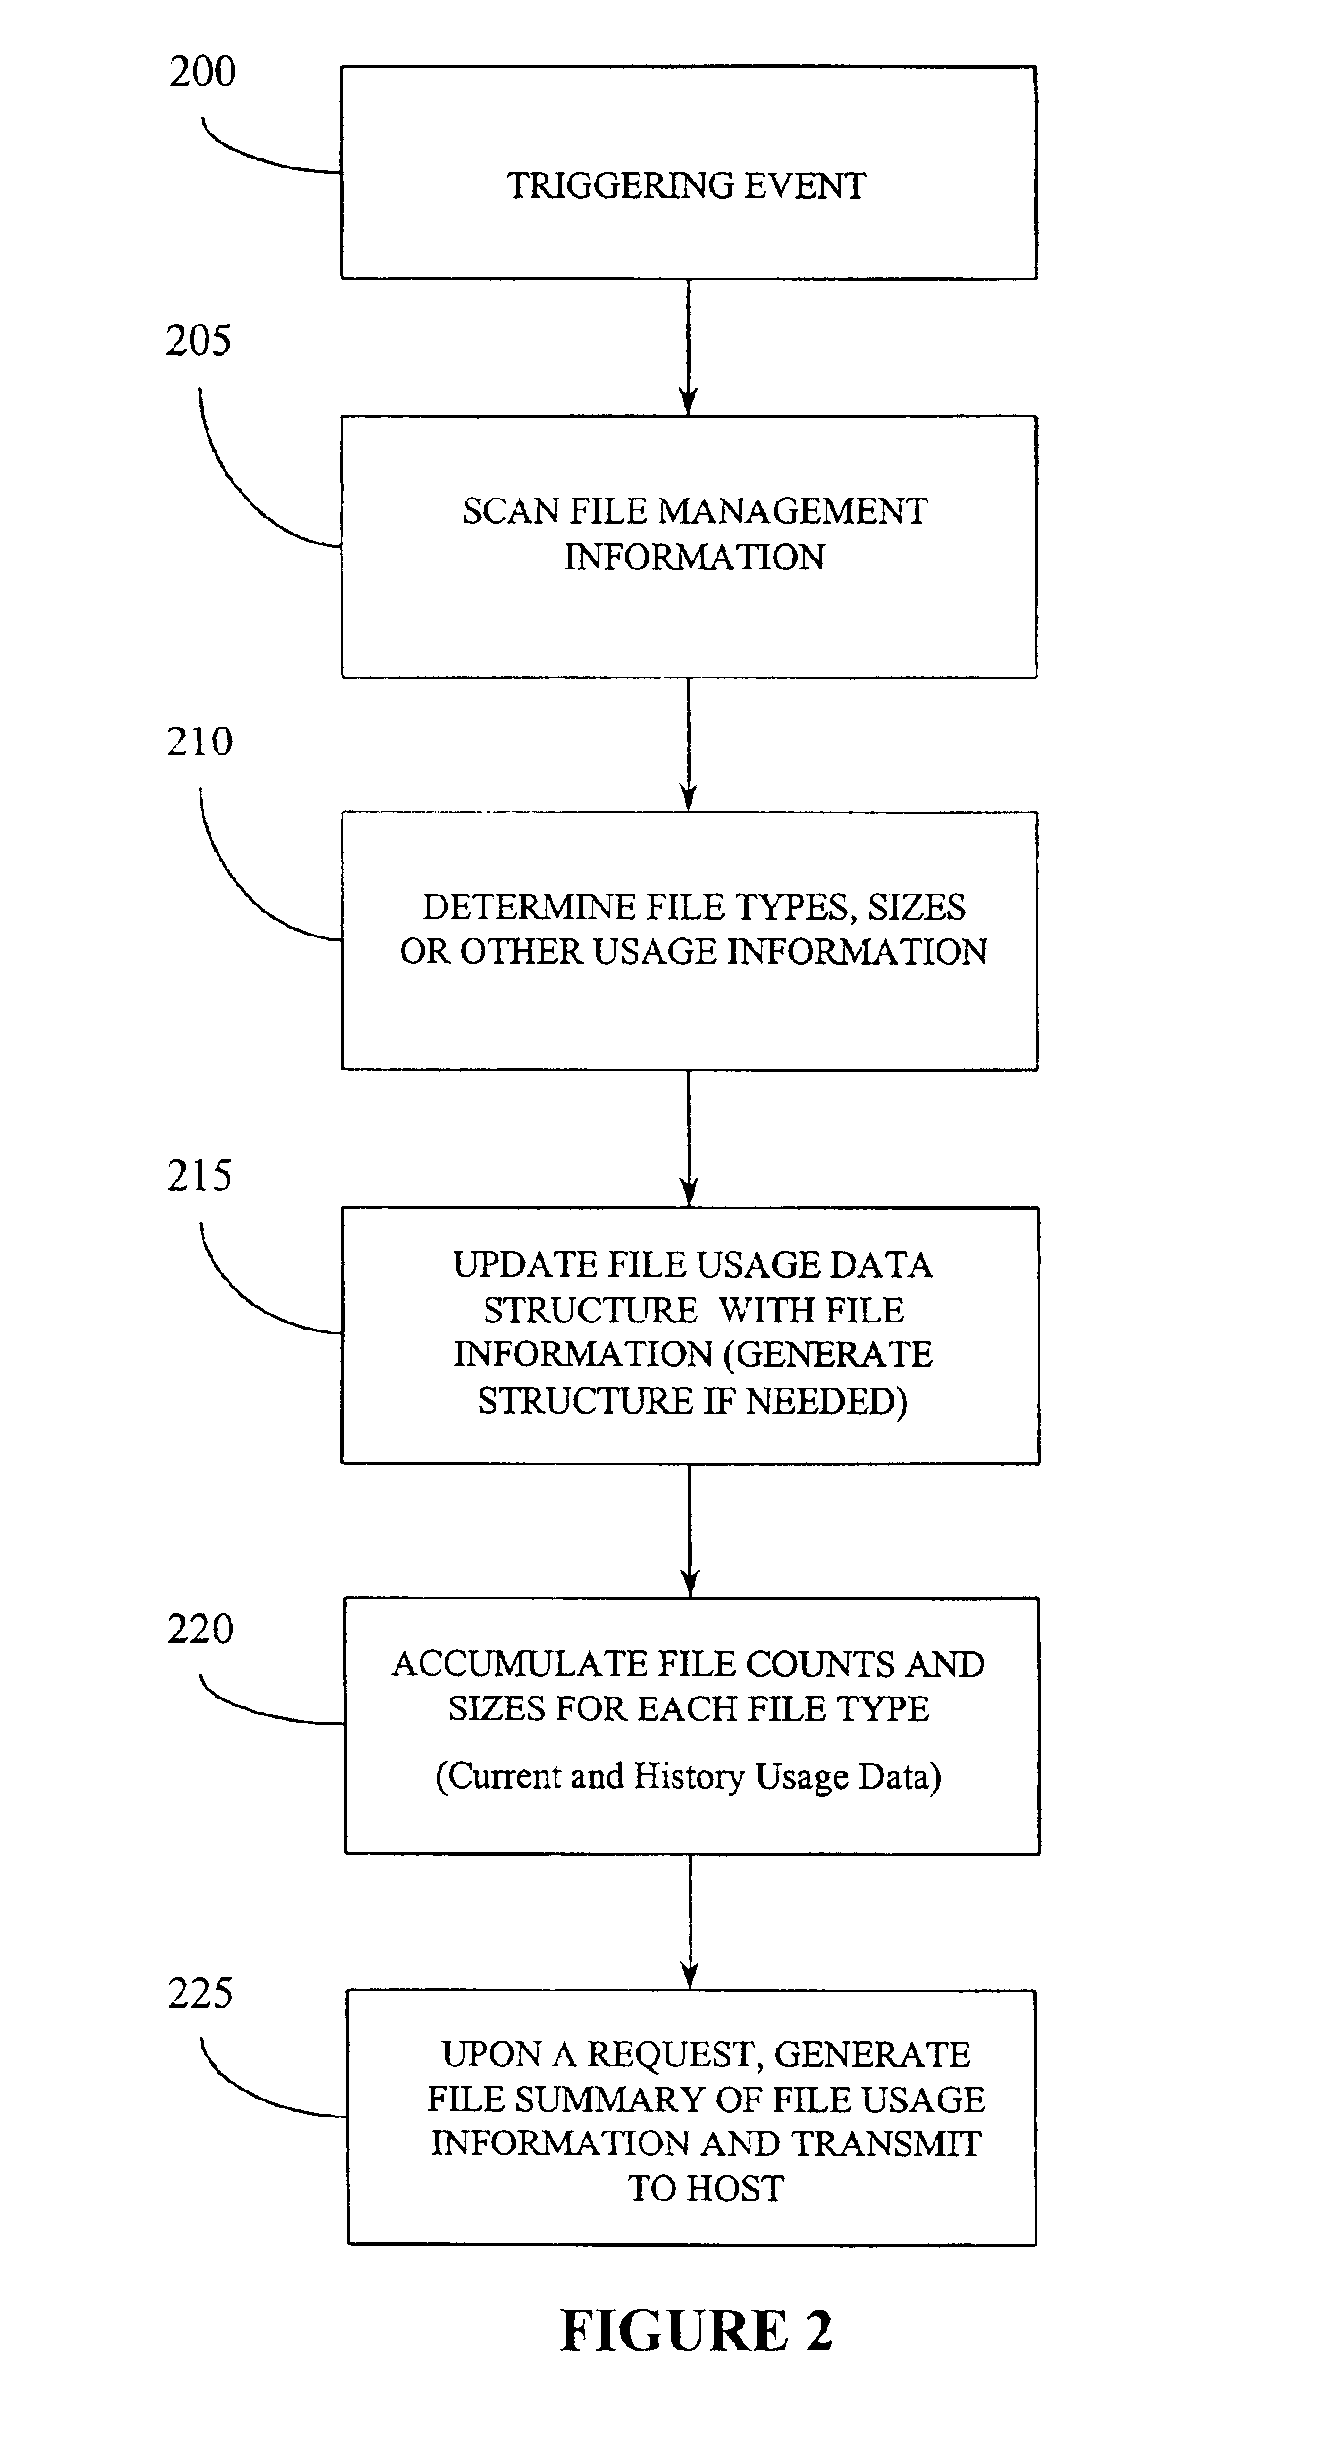 Removable data storage device having file usage system and method